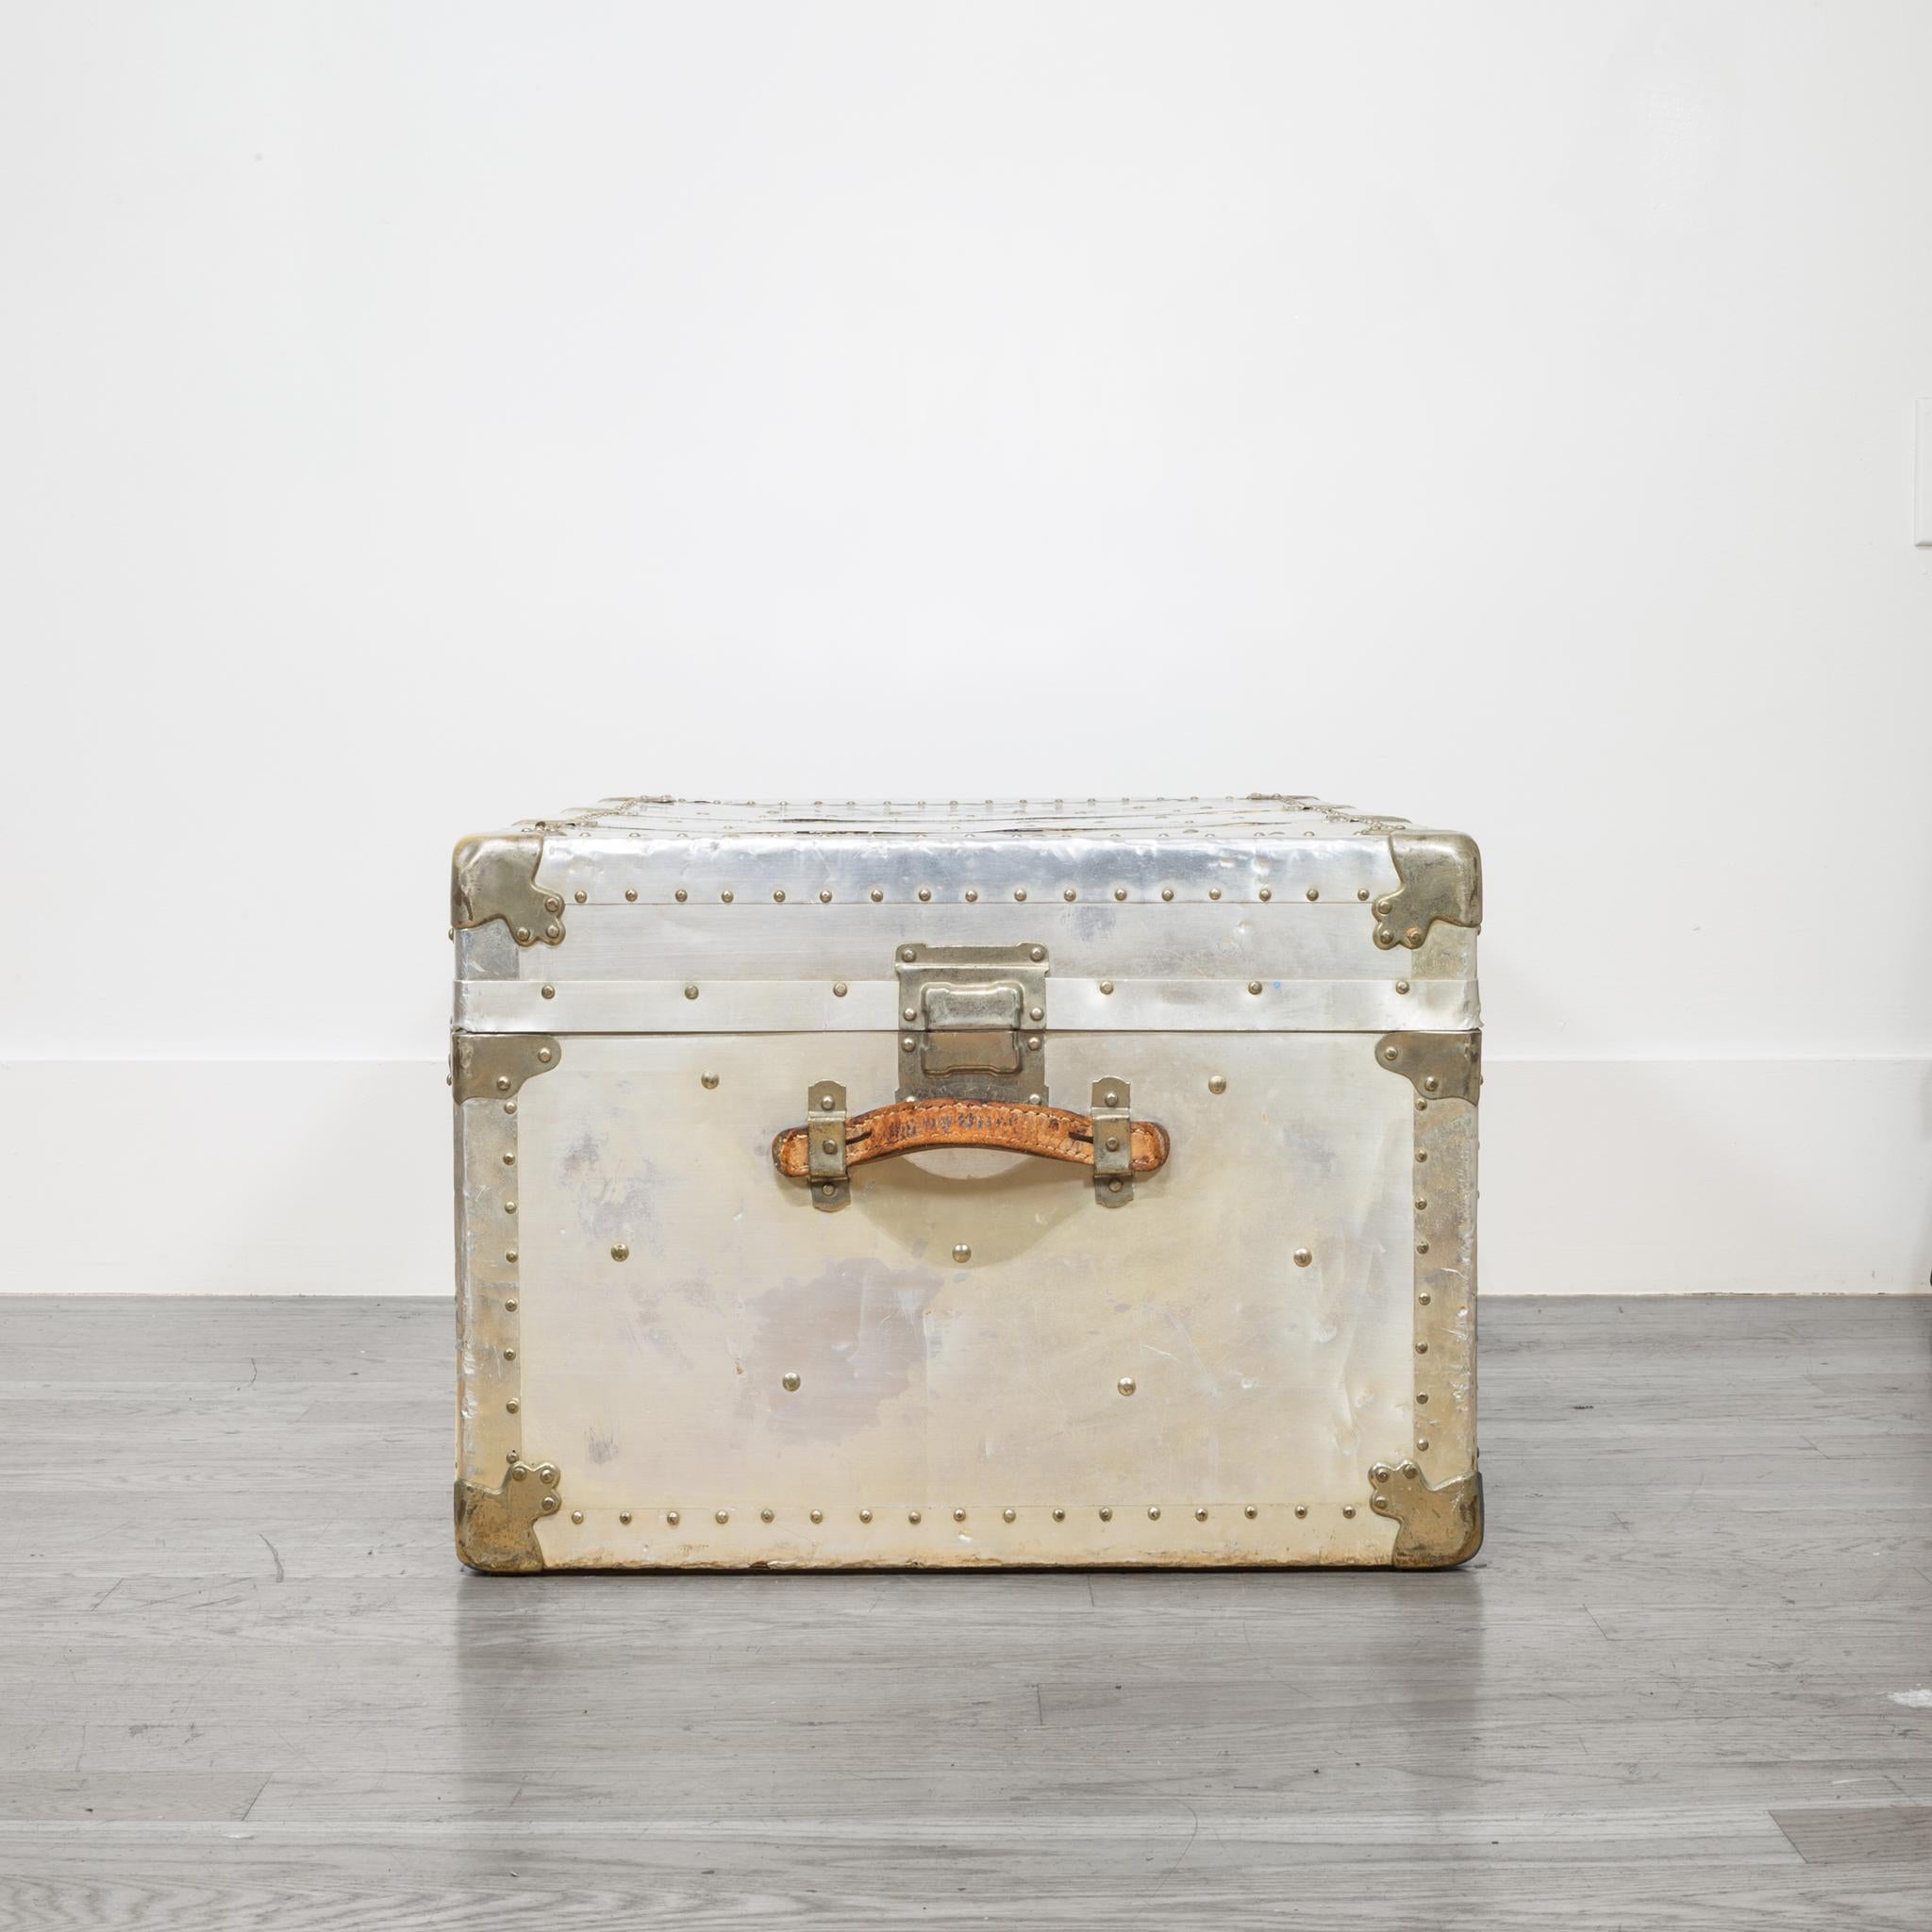 Early 20th Century Brass and Polished Aluminum Trunk with Leather Handles (Industriell)